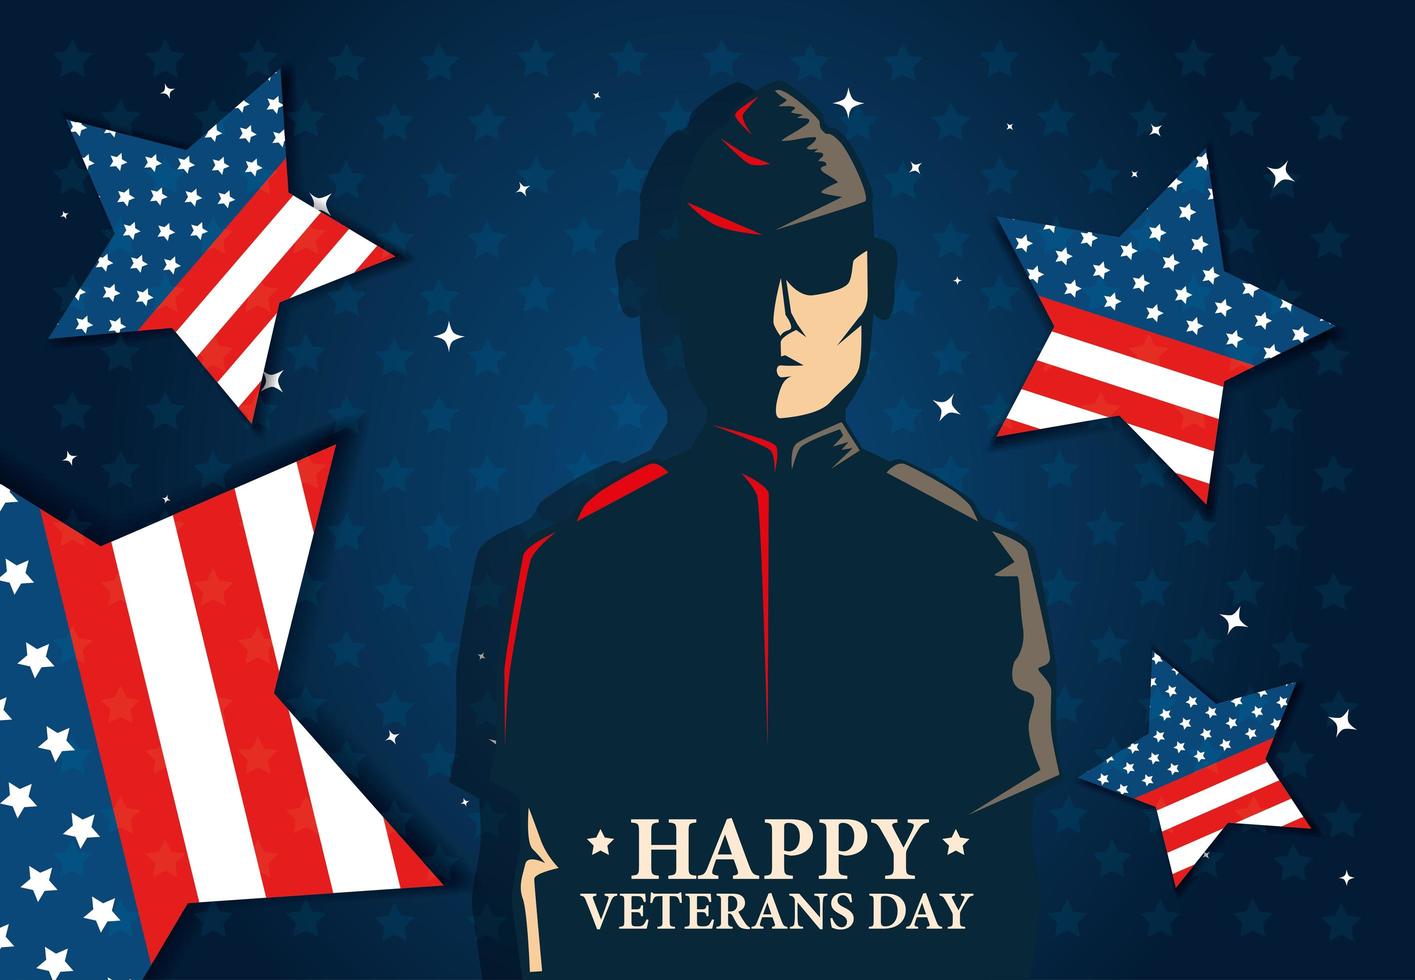 veterans day celebration with military and stars vector